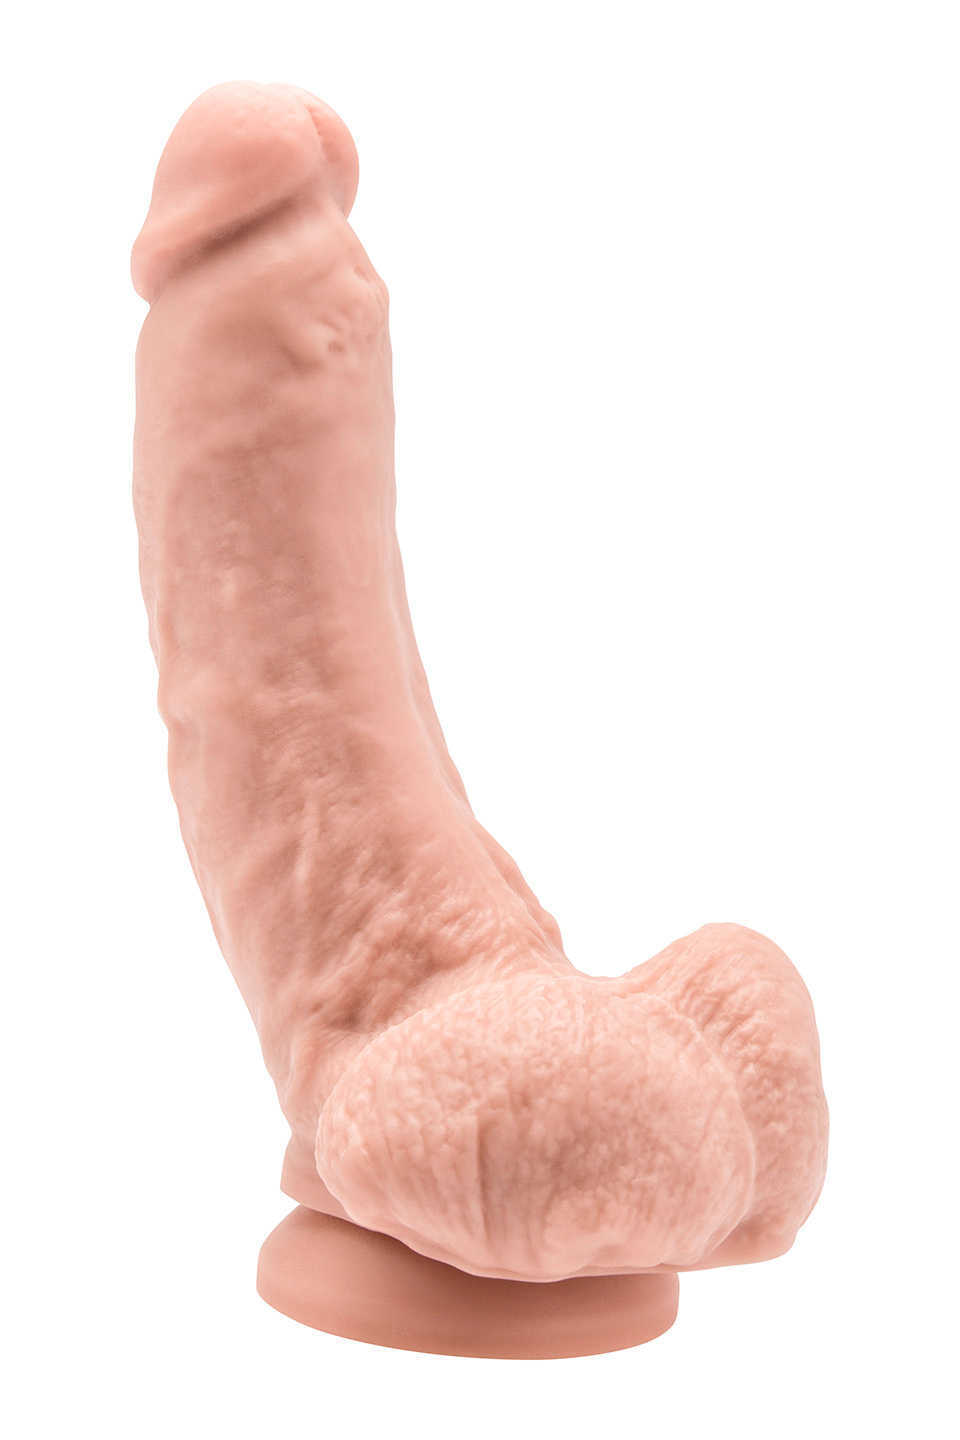 Get Real by TOYJOY Dildo 8 Inch